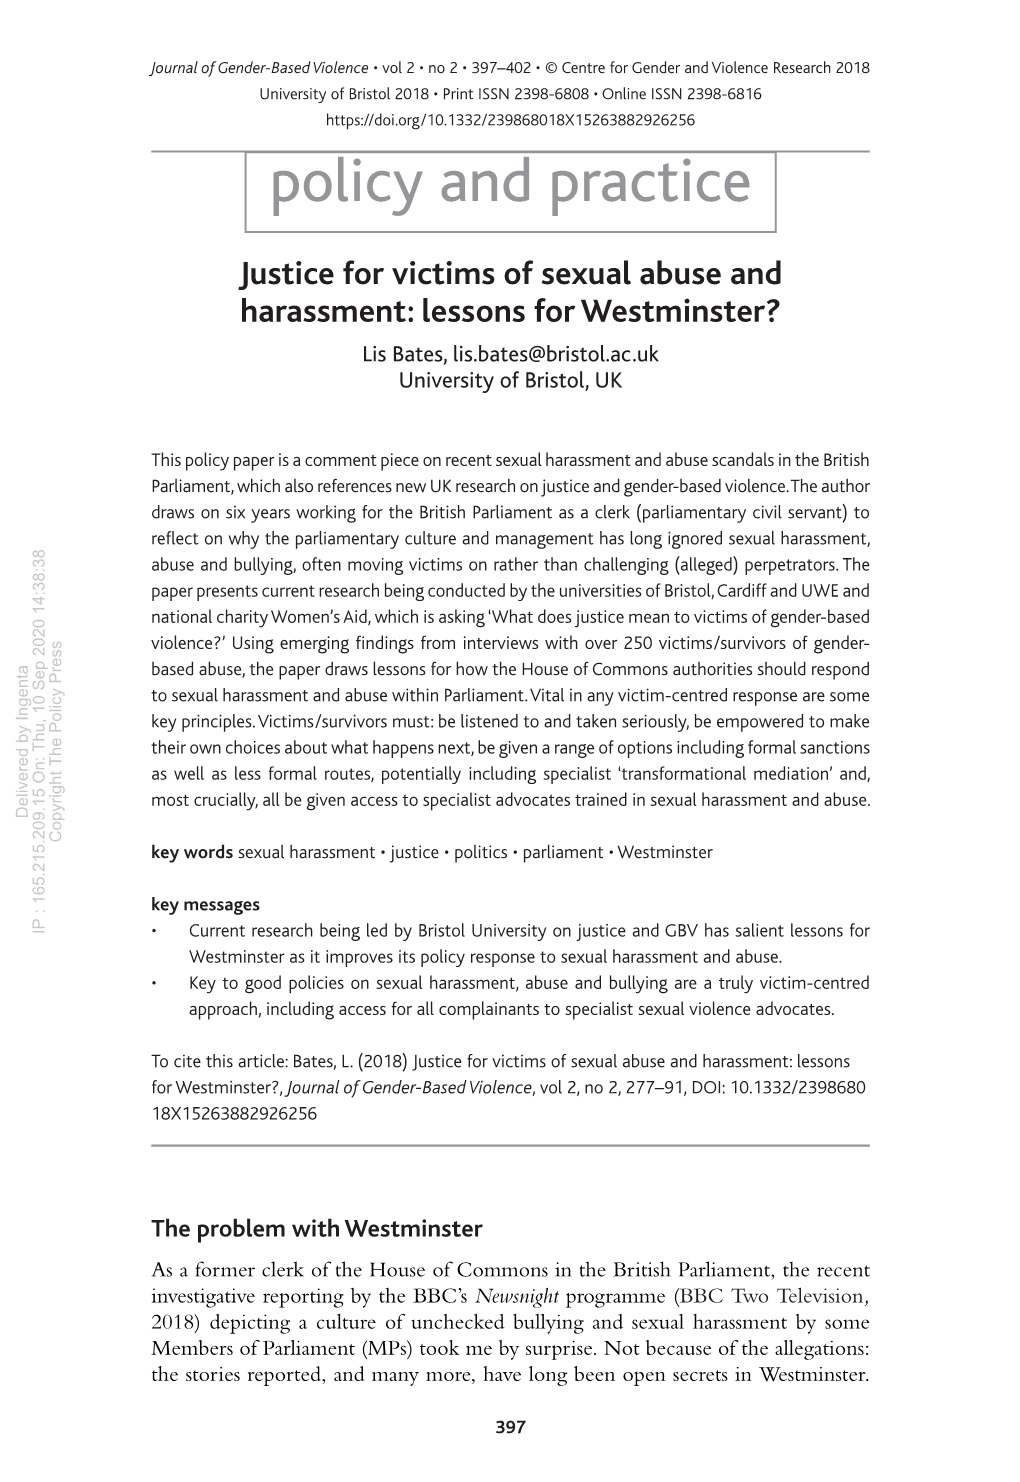 Justice for Victims of Sexual Abuse and Harassment